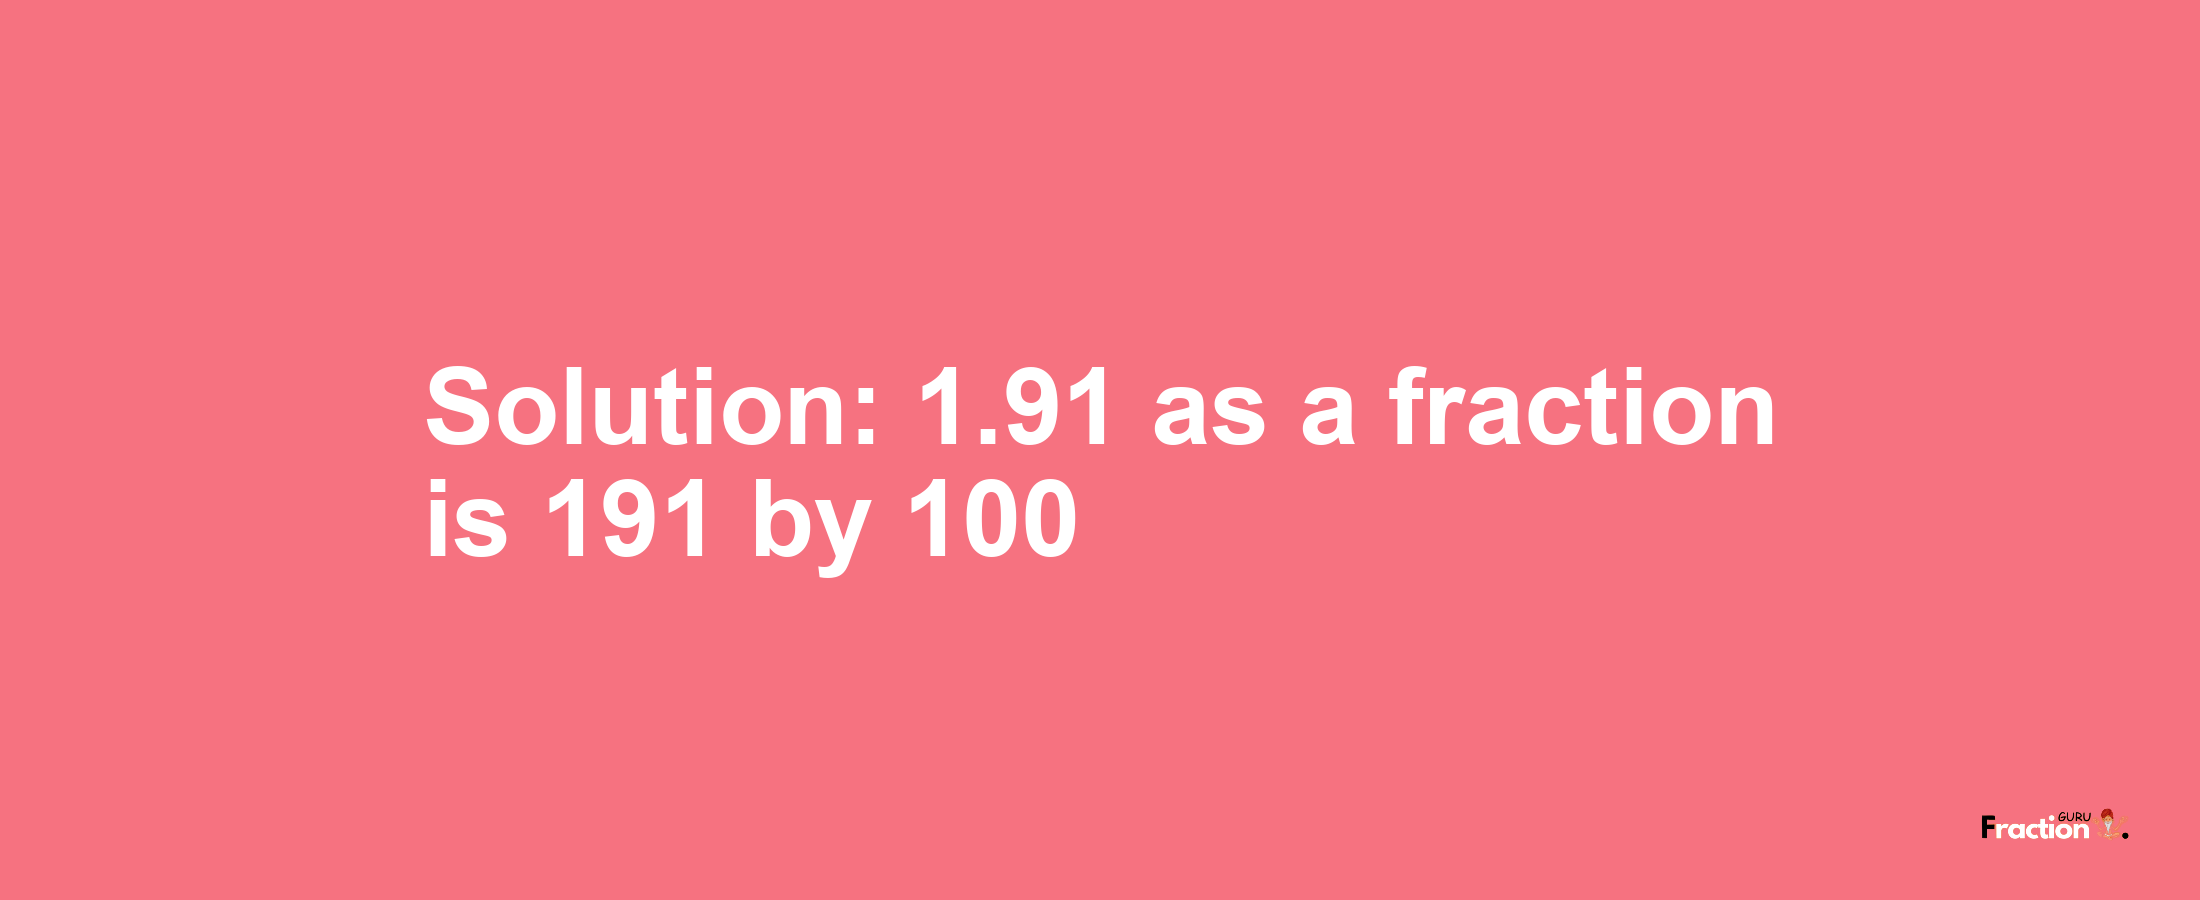 Solution:1.91 as a fraction is 191/100